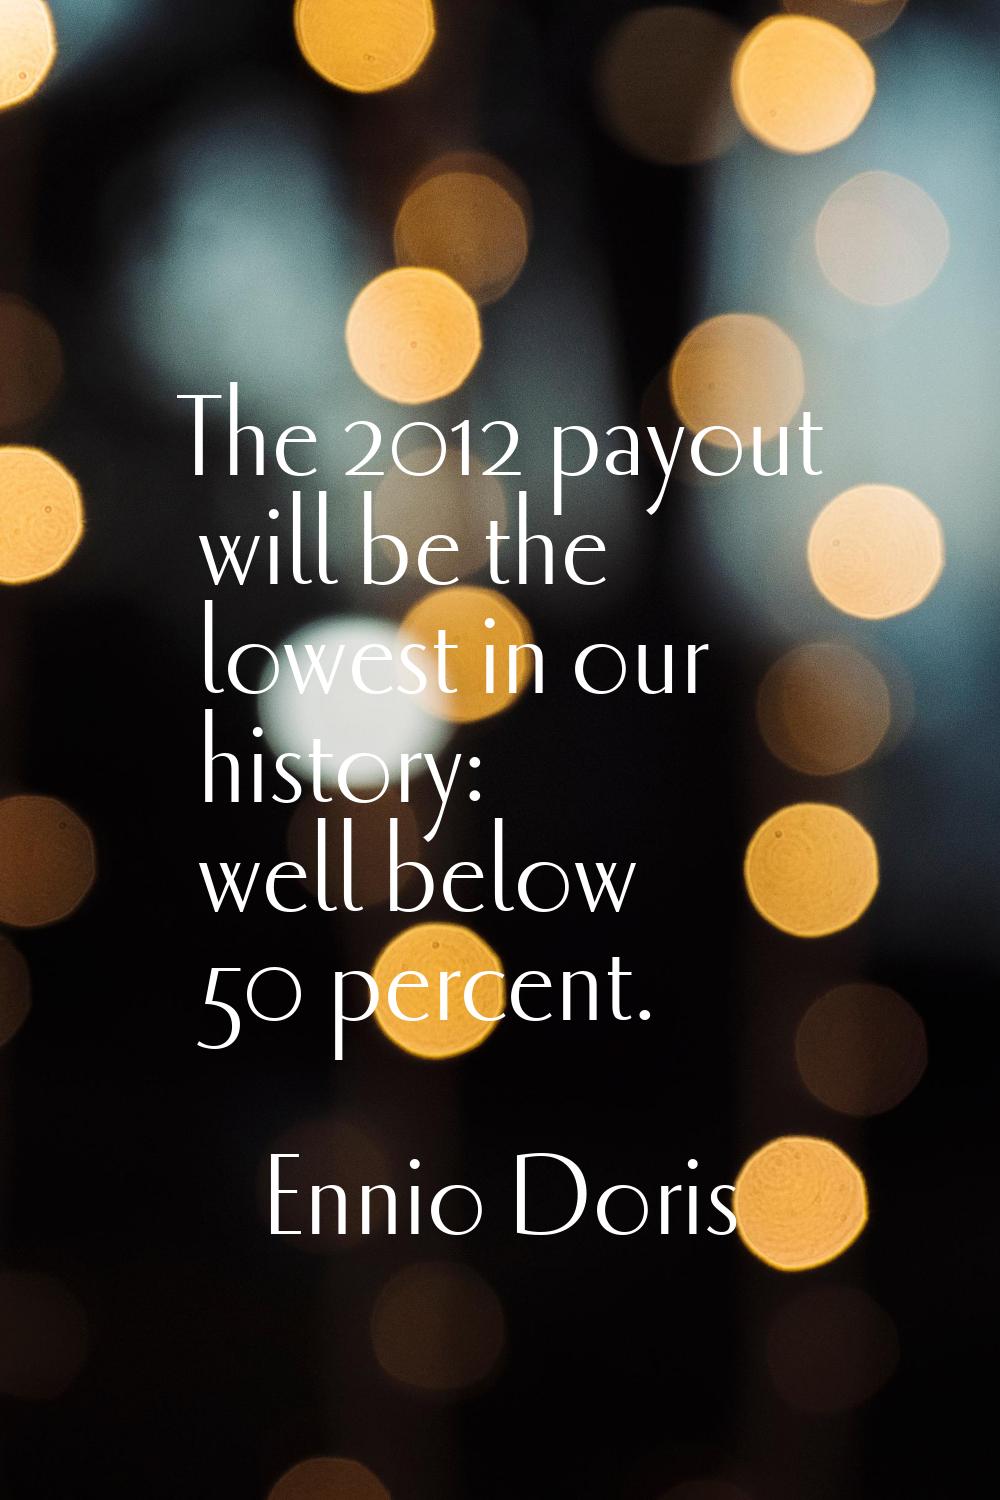 The 2012 payout will be the lowest in our history: well below 50 percent.